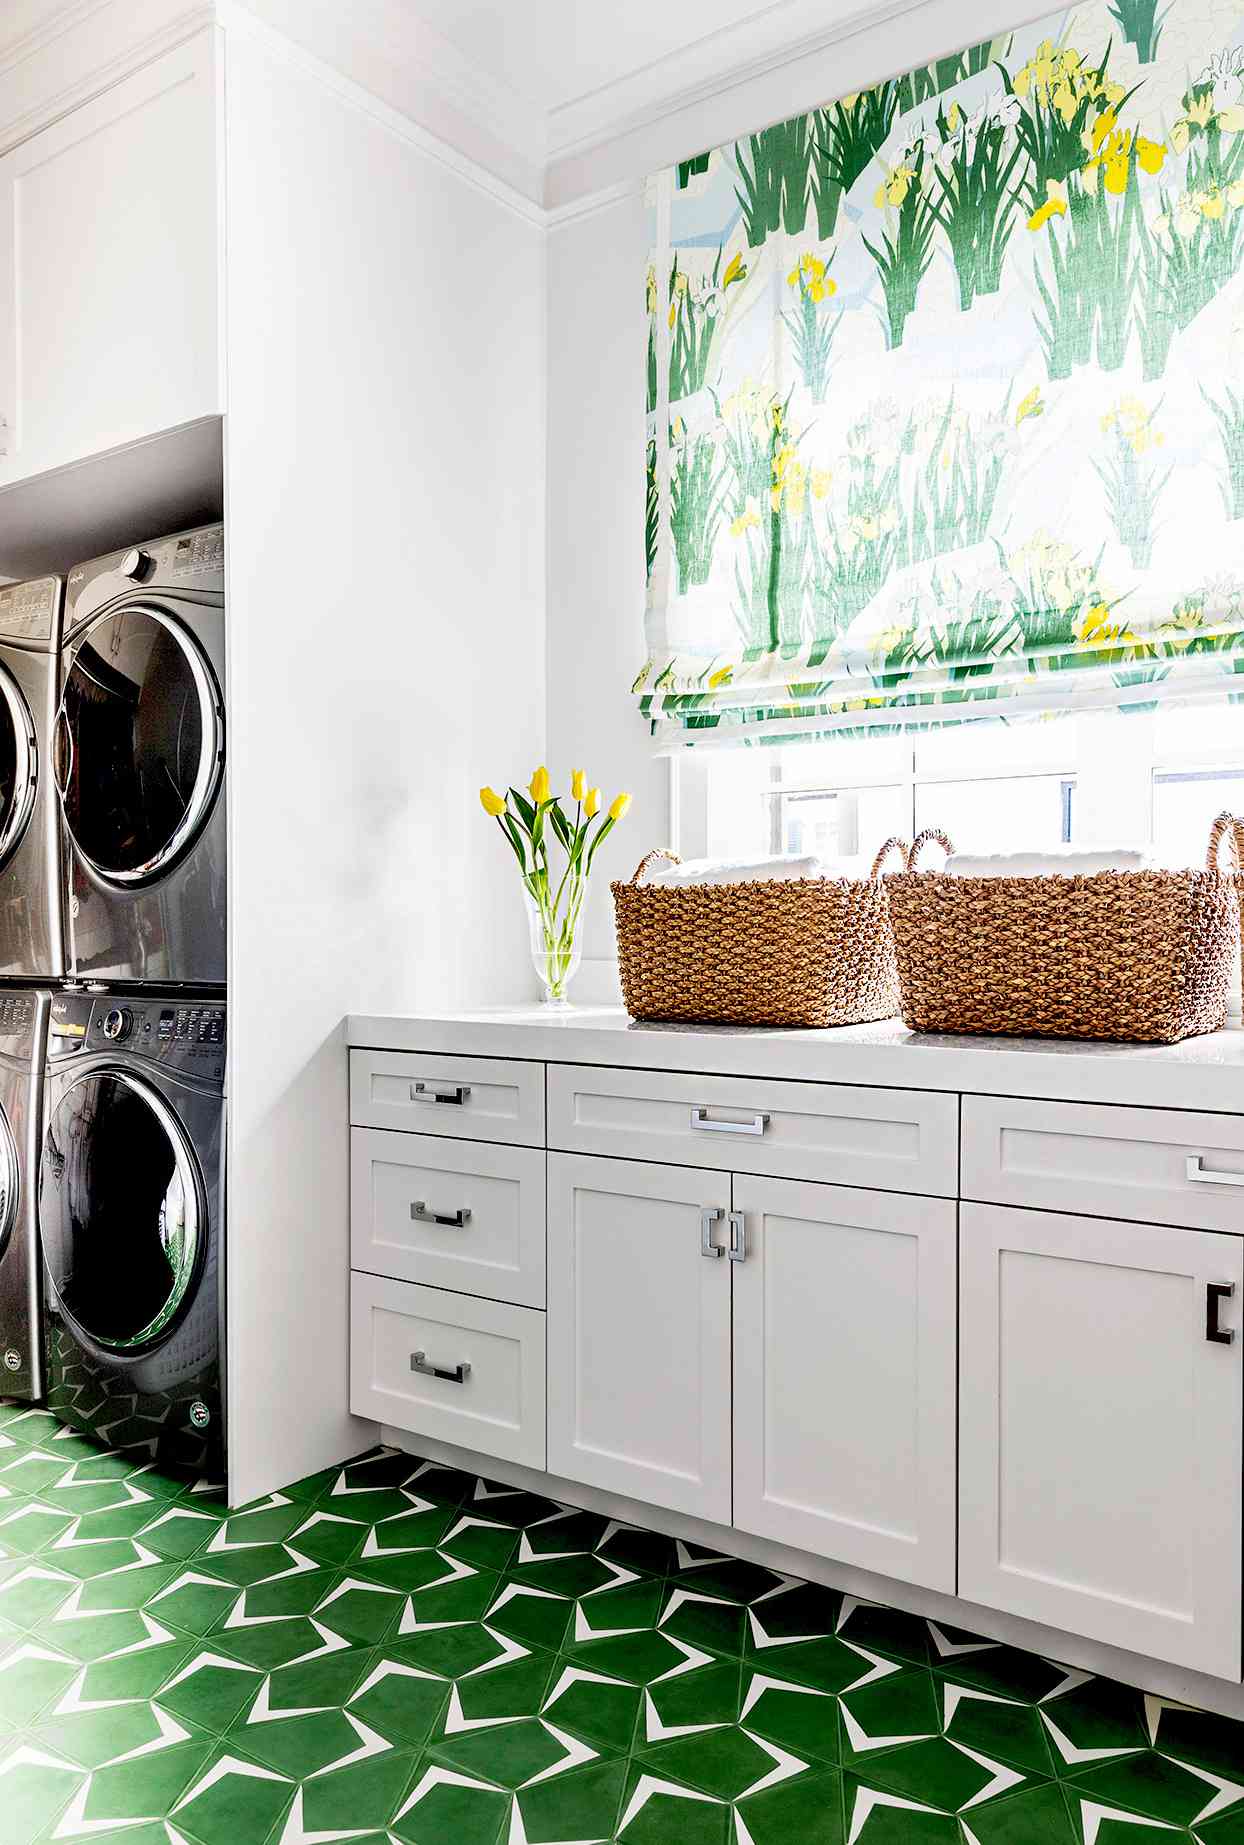 Laundry room with geometric floors and white counters